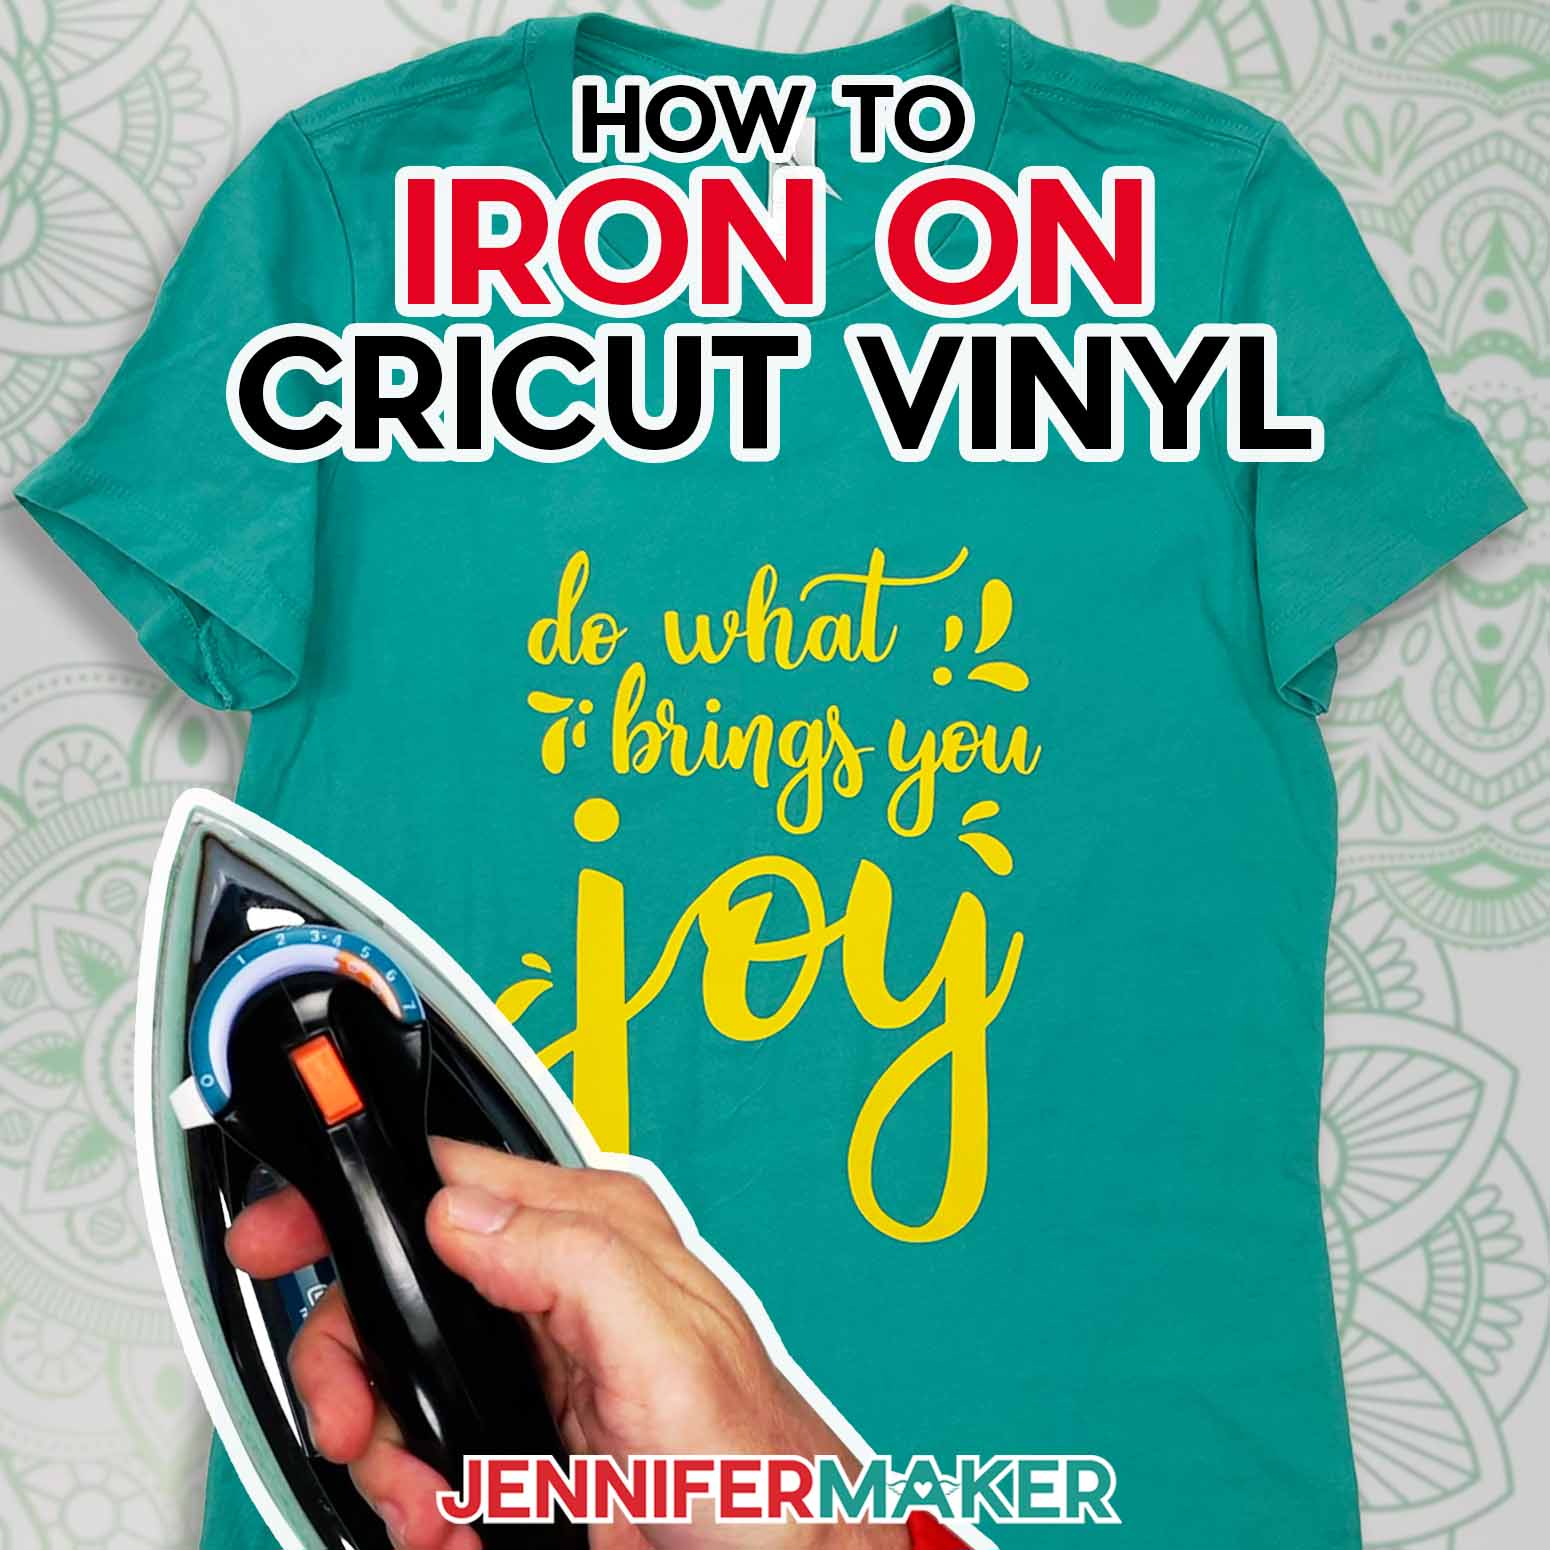 How to Iron On Cricut Vinyl With a Home Iron!